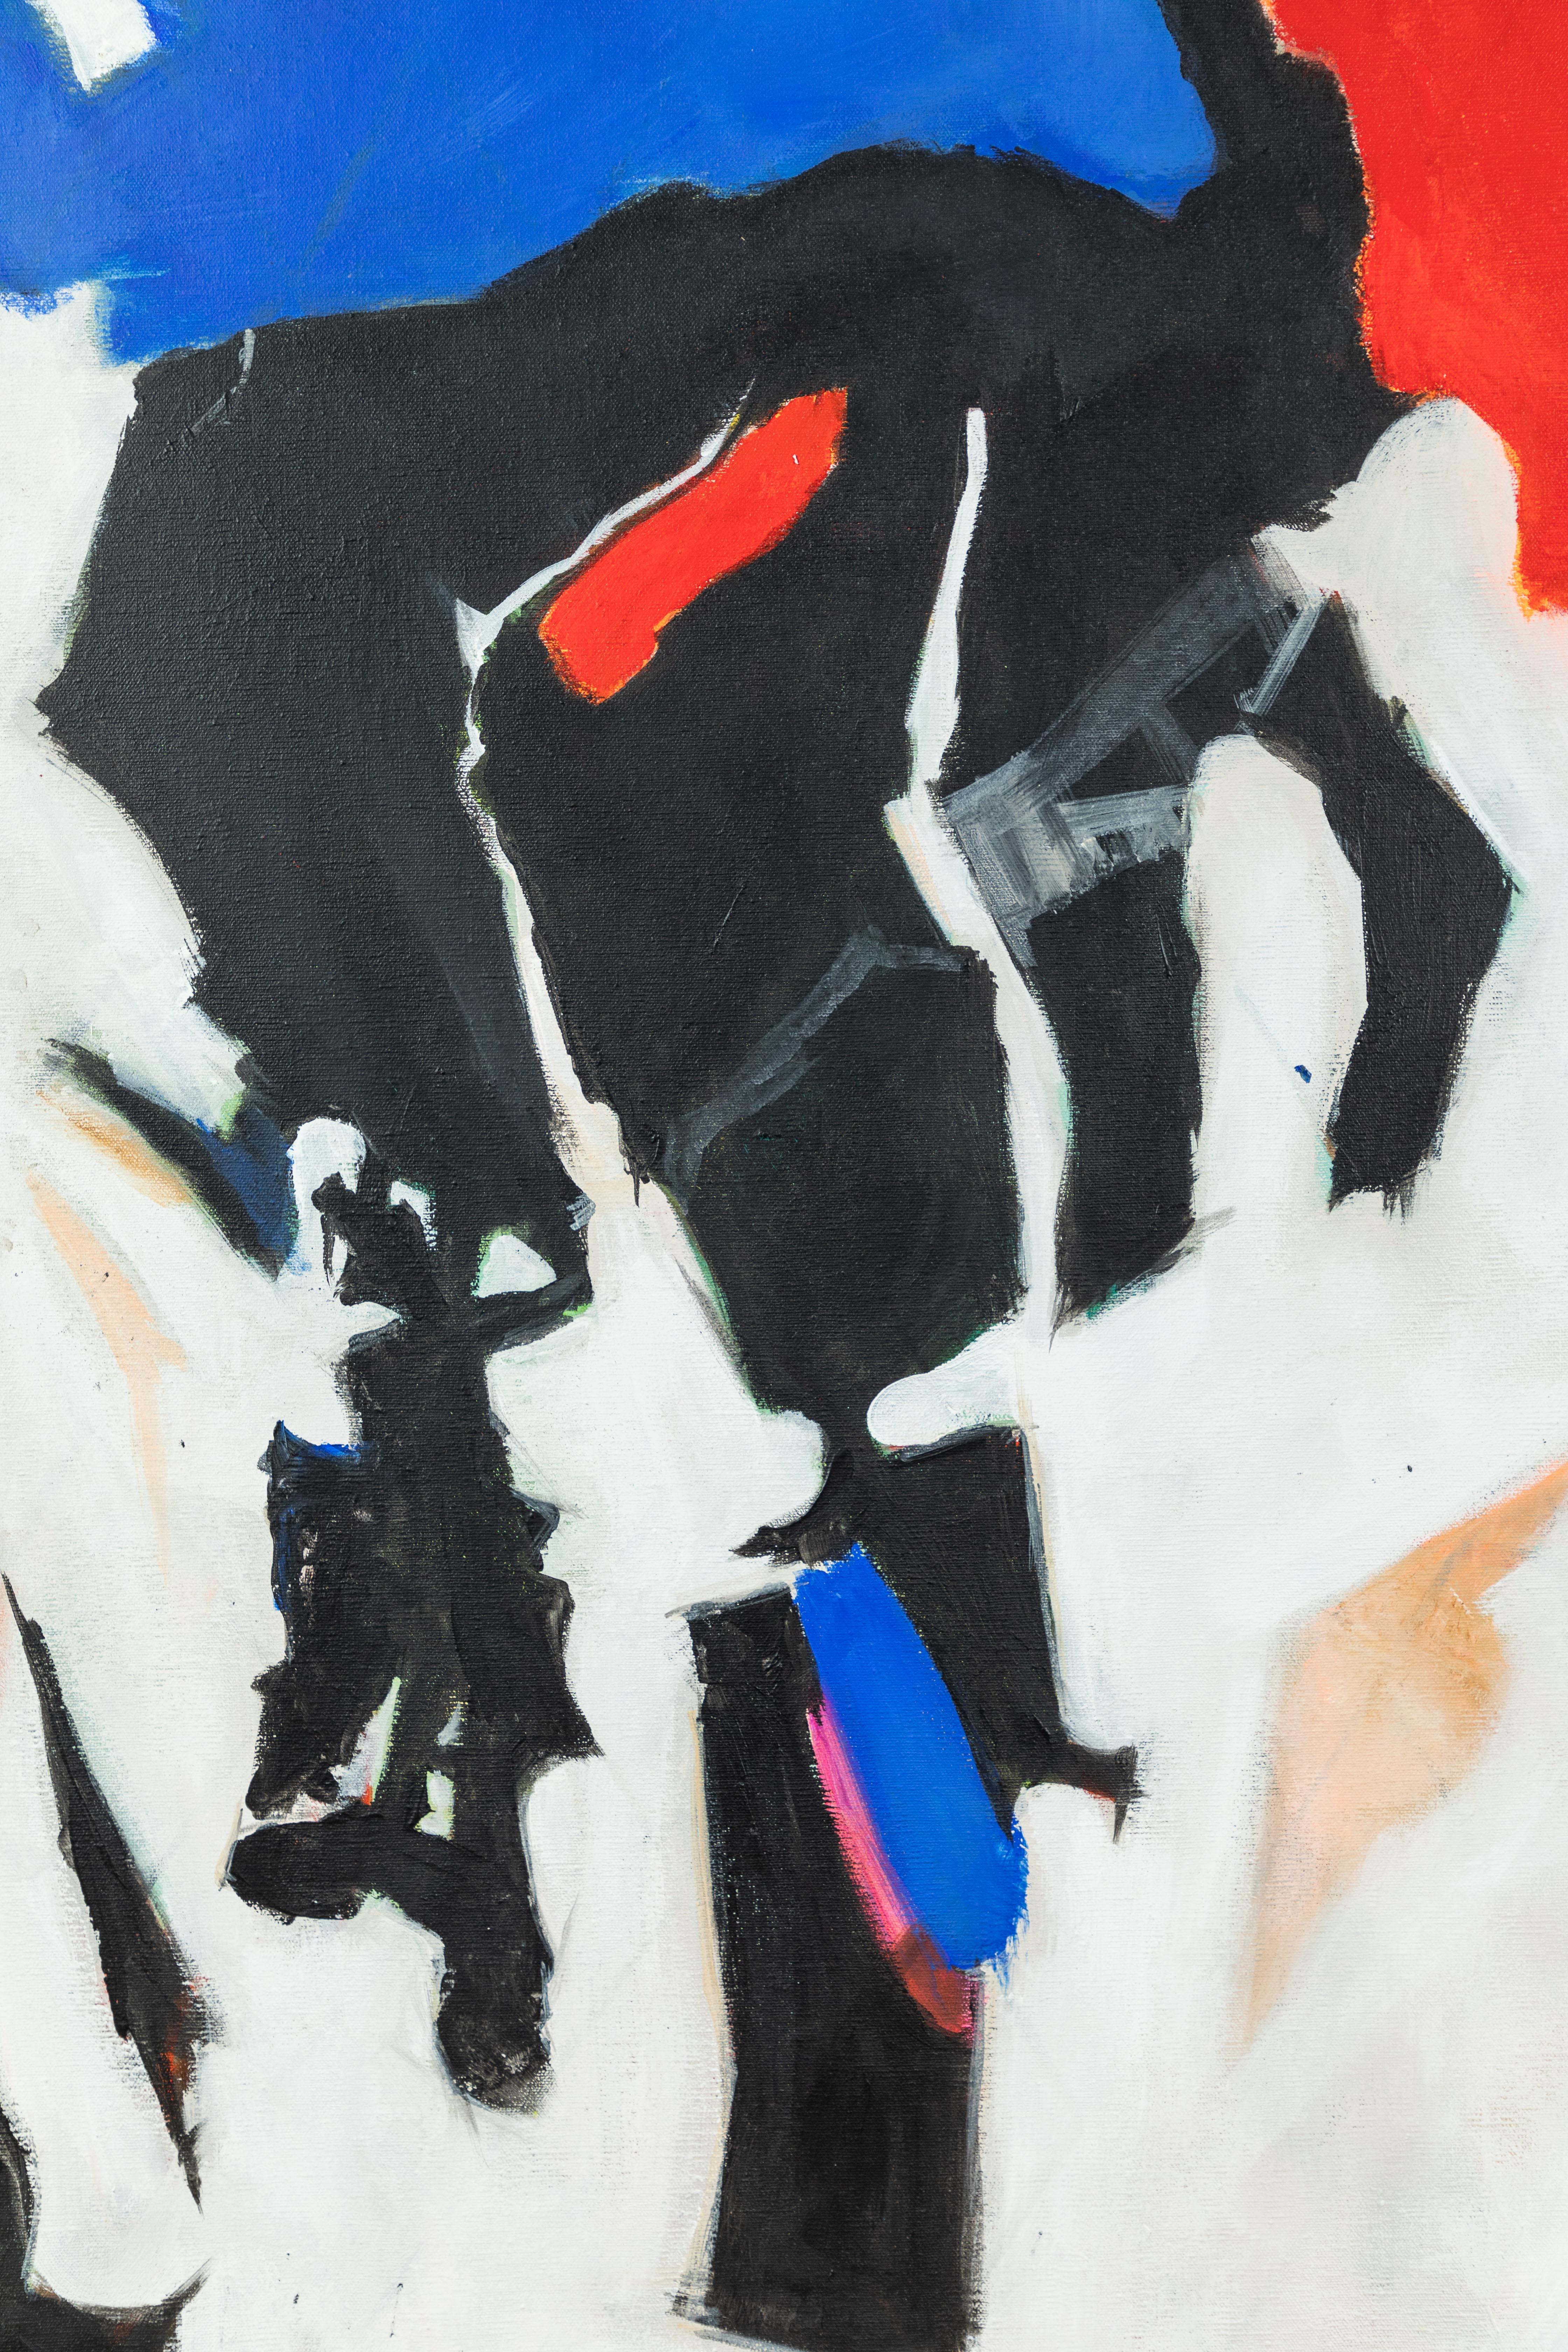 Original, signed and dated, 1964 oil on canvas painting missing pieces, by notable American artist, Perle Fine, (1905-1988). Select public collections: Brooklyn Museum, New York, Corcoran Gallery, Washington, D.C., Metropolitan Museum of Art, New